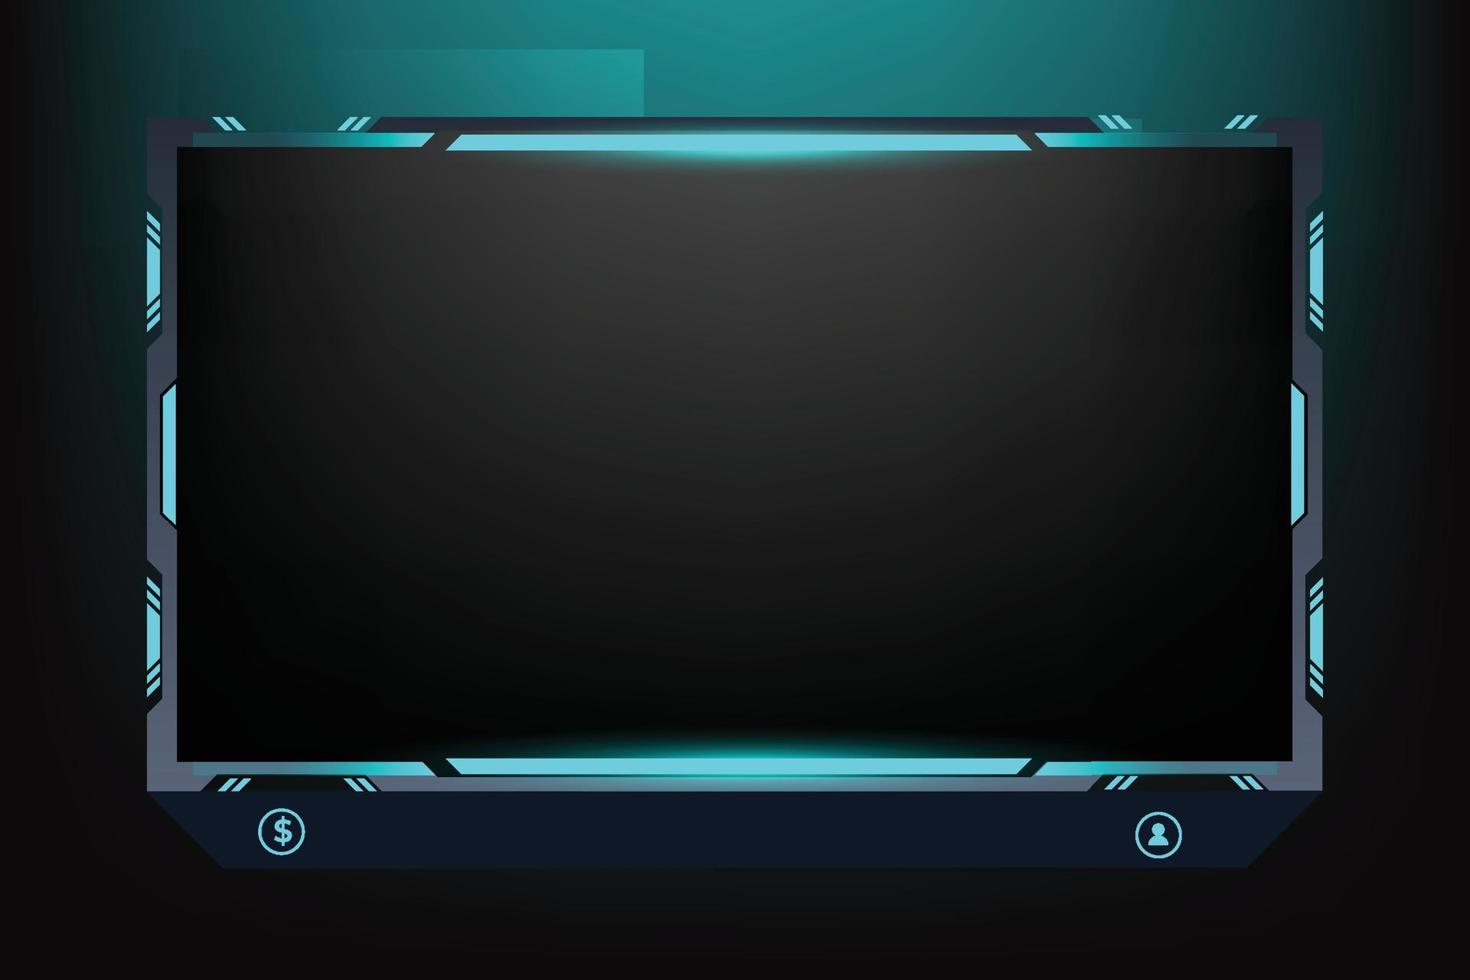 Live broadcasting screen panel design vector with abstract shapes. Online gaming overlay and screen interface decoration with shiny blue color. Live streaming overlay design for gamers.